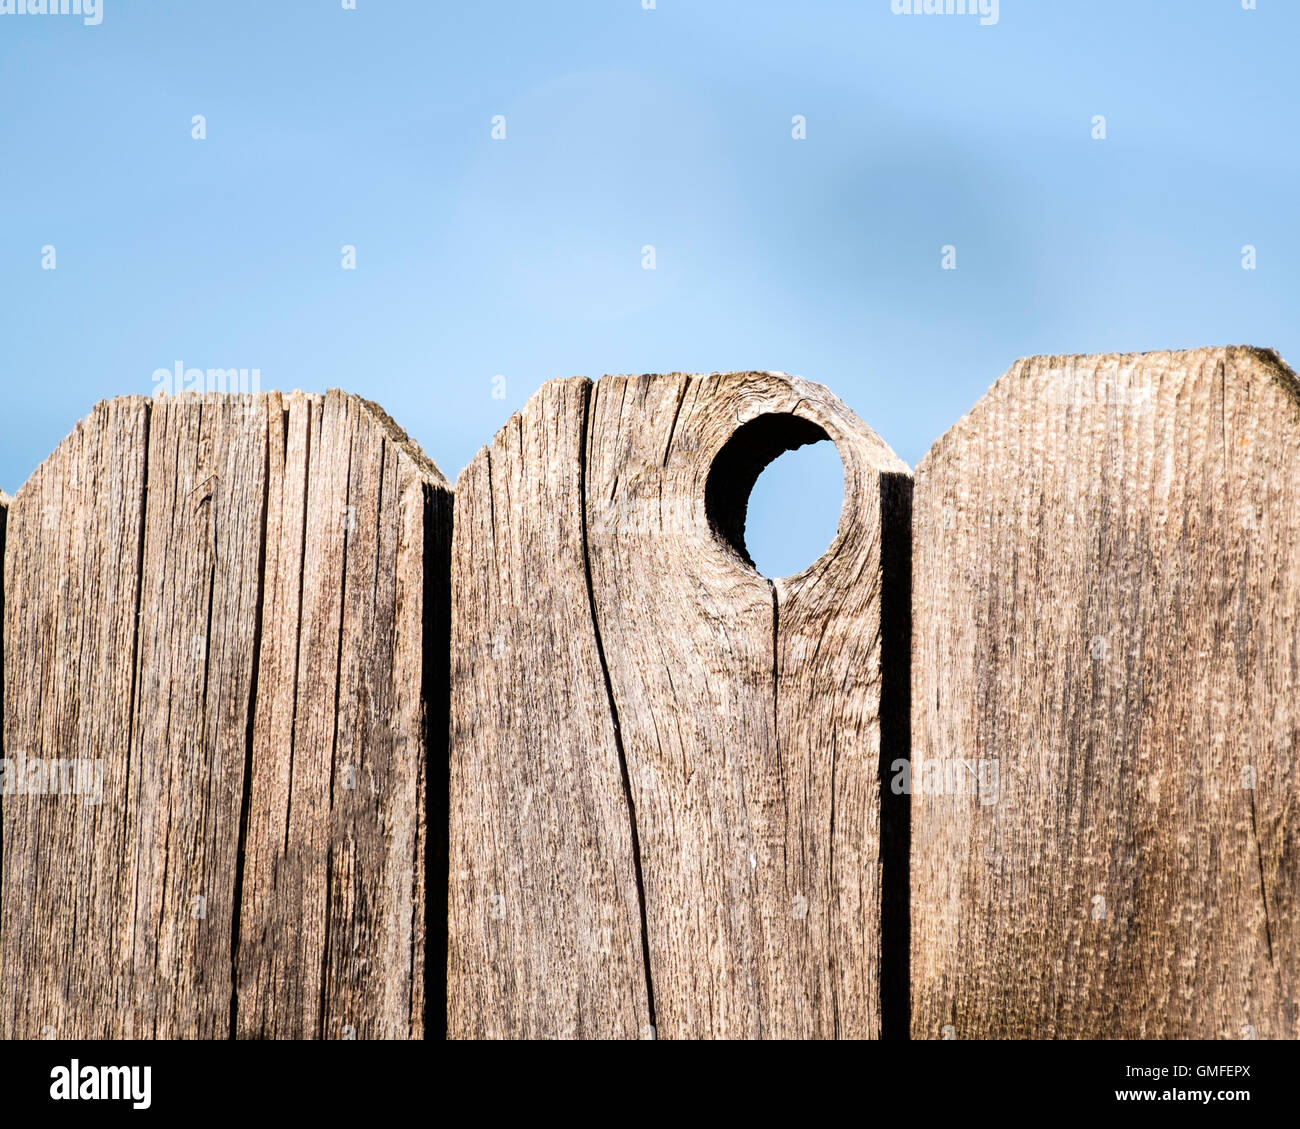 A knothole in a wooden fence, conceptual image. Stock Photo